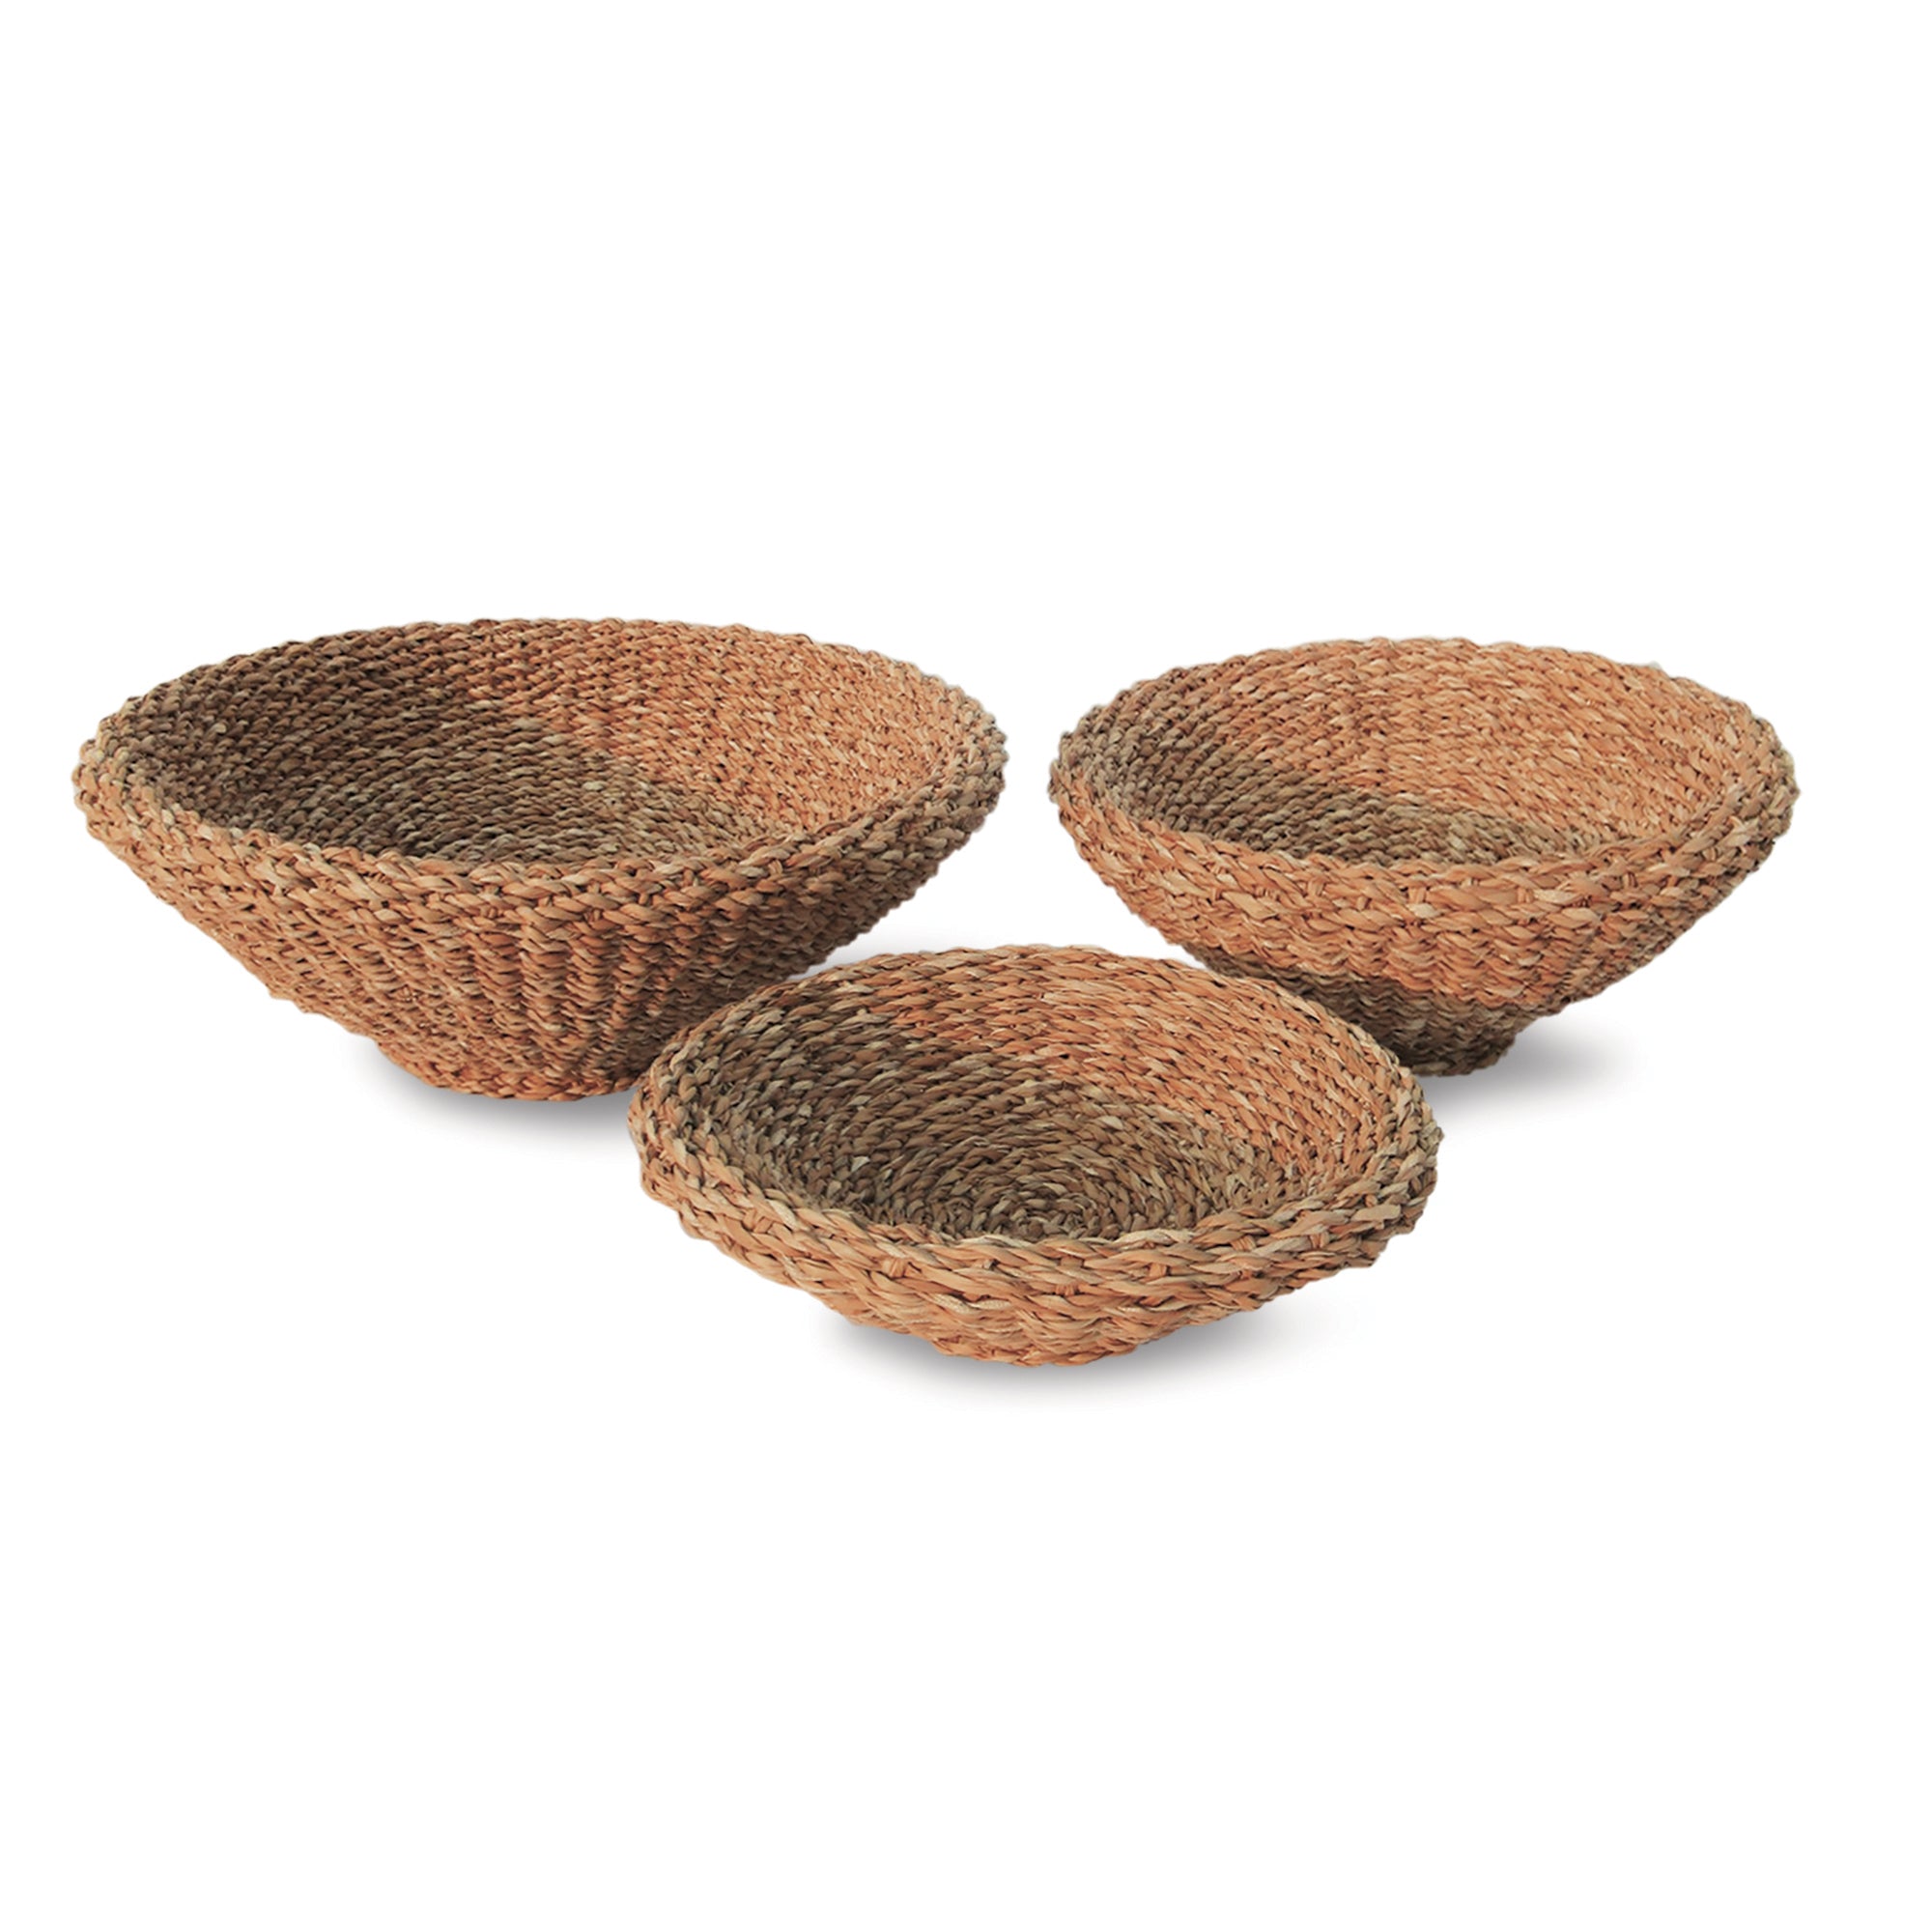 Shallow Tapered Seagrass Basket (3 Sizes)